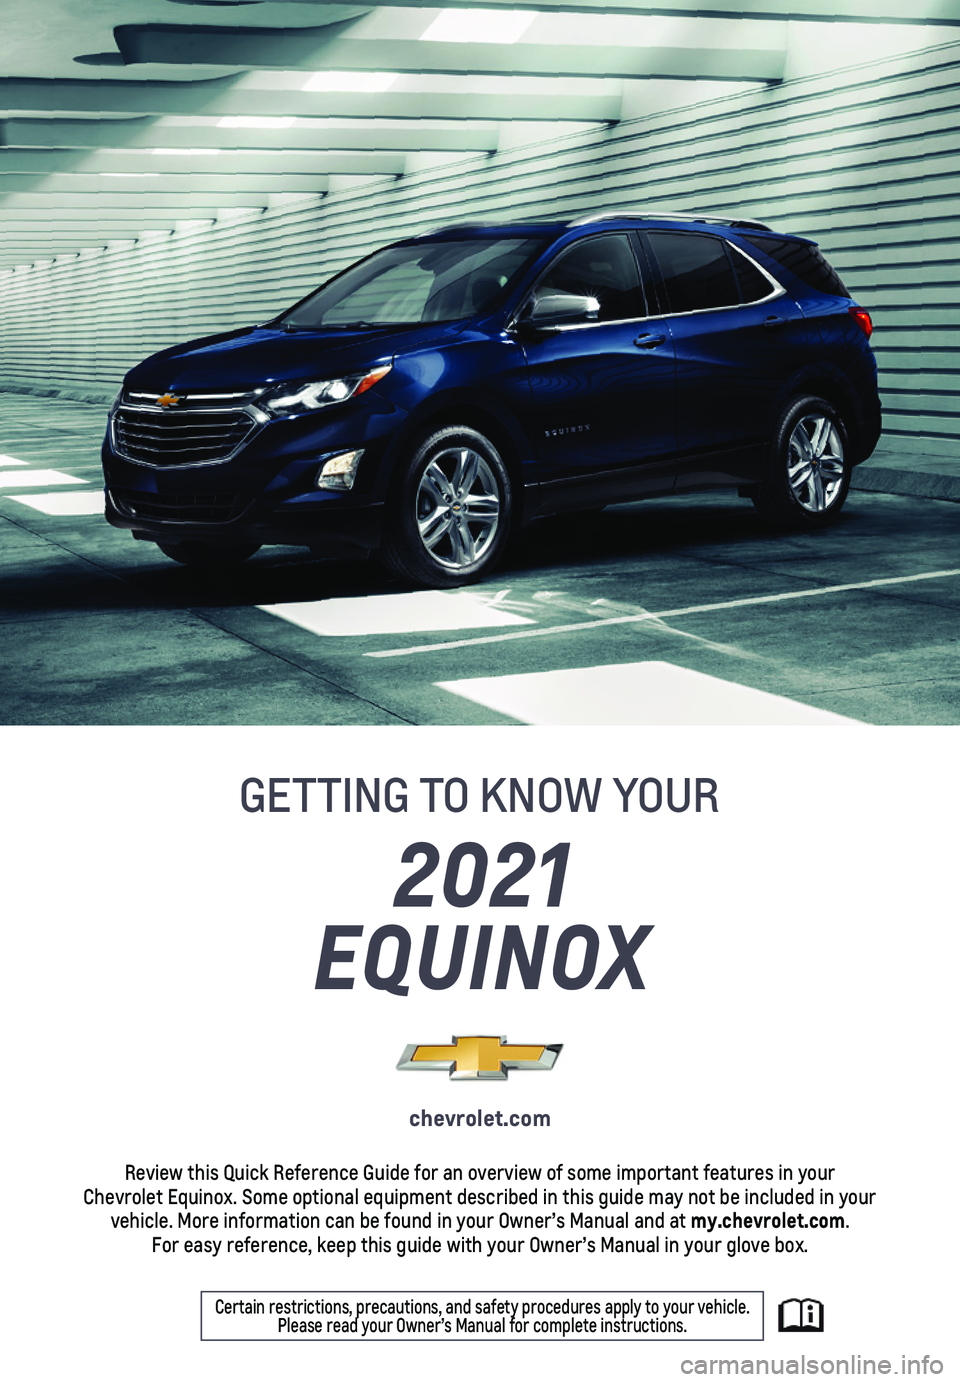 CHEVROLET EQUINOX 2021  Get To Know Guide 1
2021 
EQUINOX
GETTING TO KNOW YOUR
chevrolet.com
Review this Quick Reference Guide for an overview of some important feat\
ures in your  Chevrolet Equinox. Some optional equipment described in this 